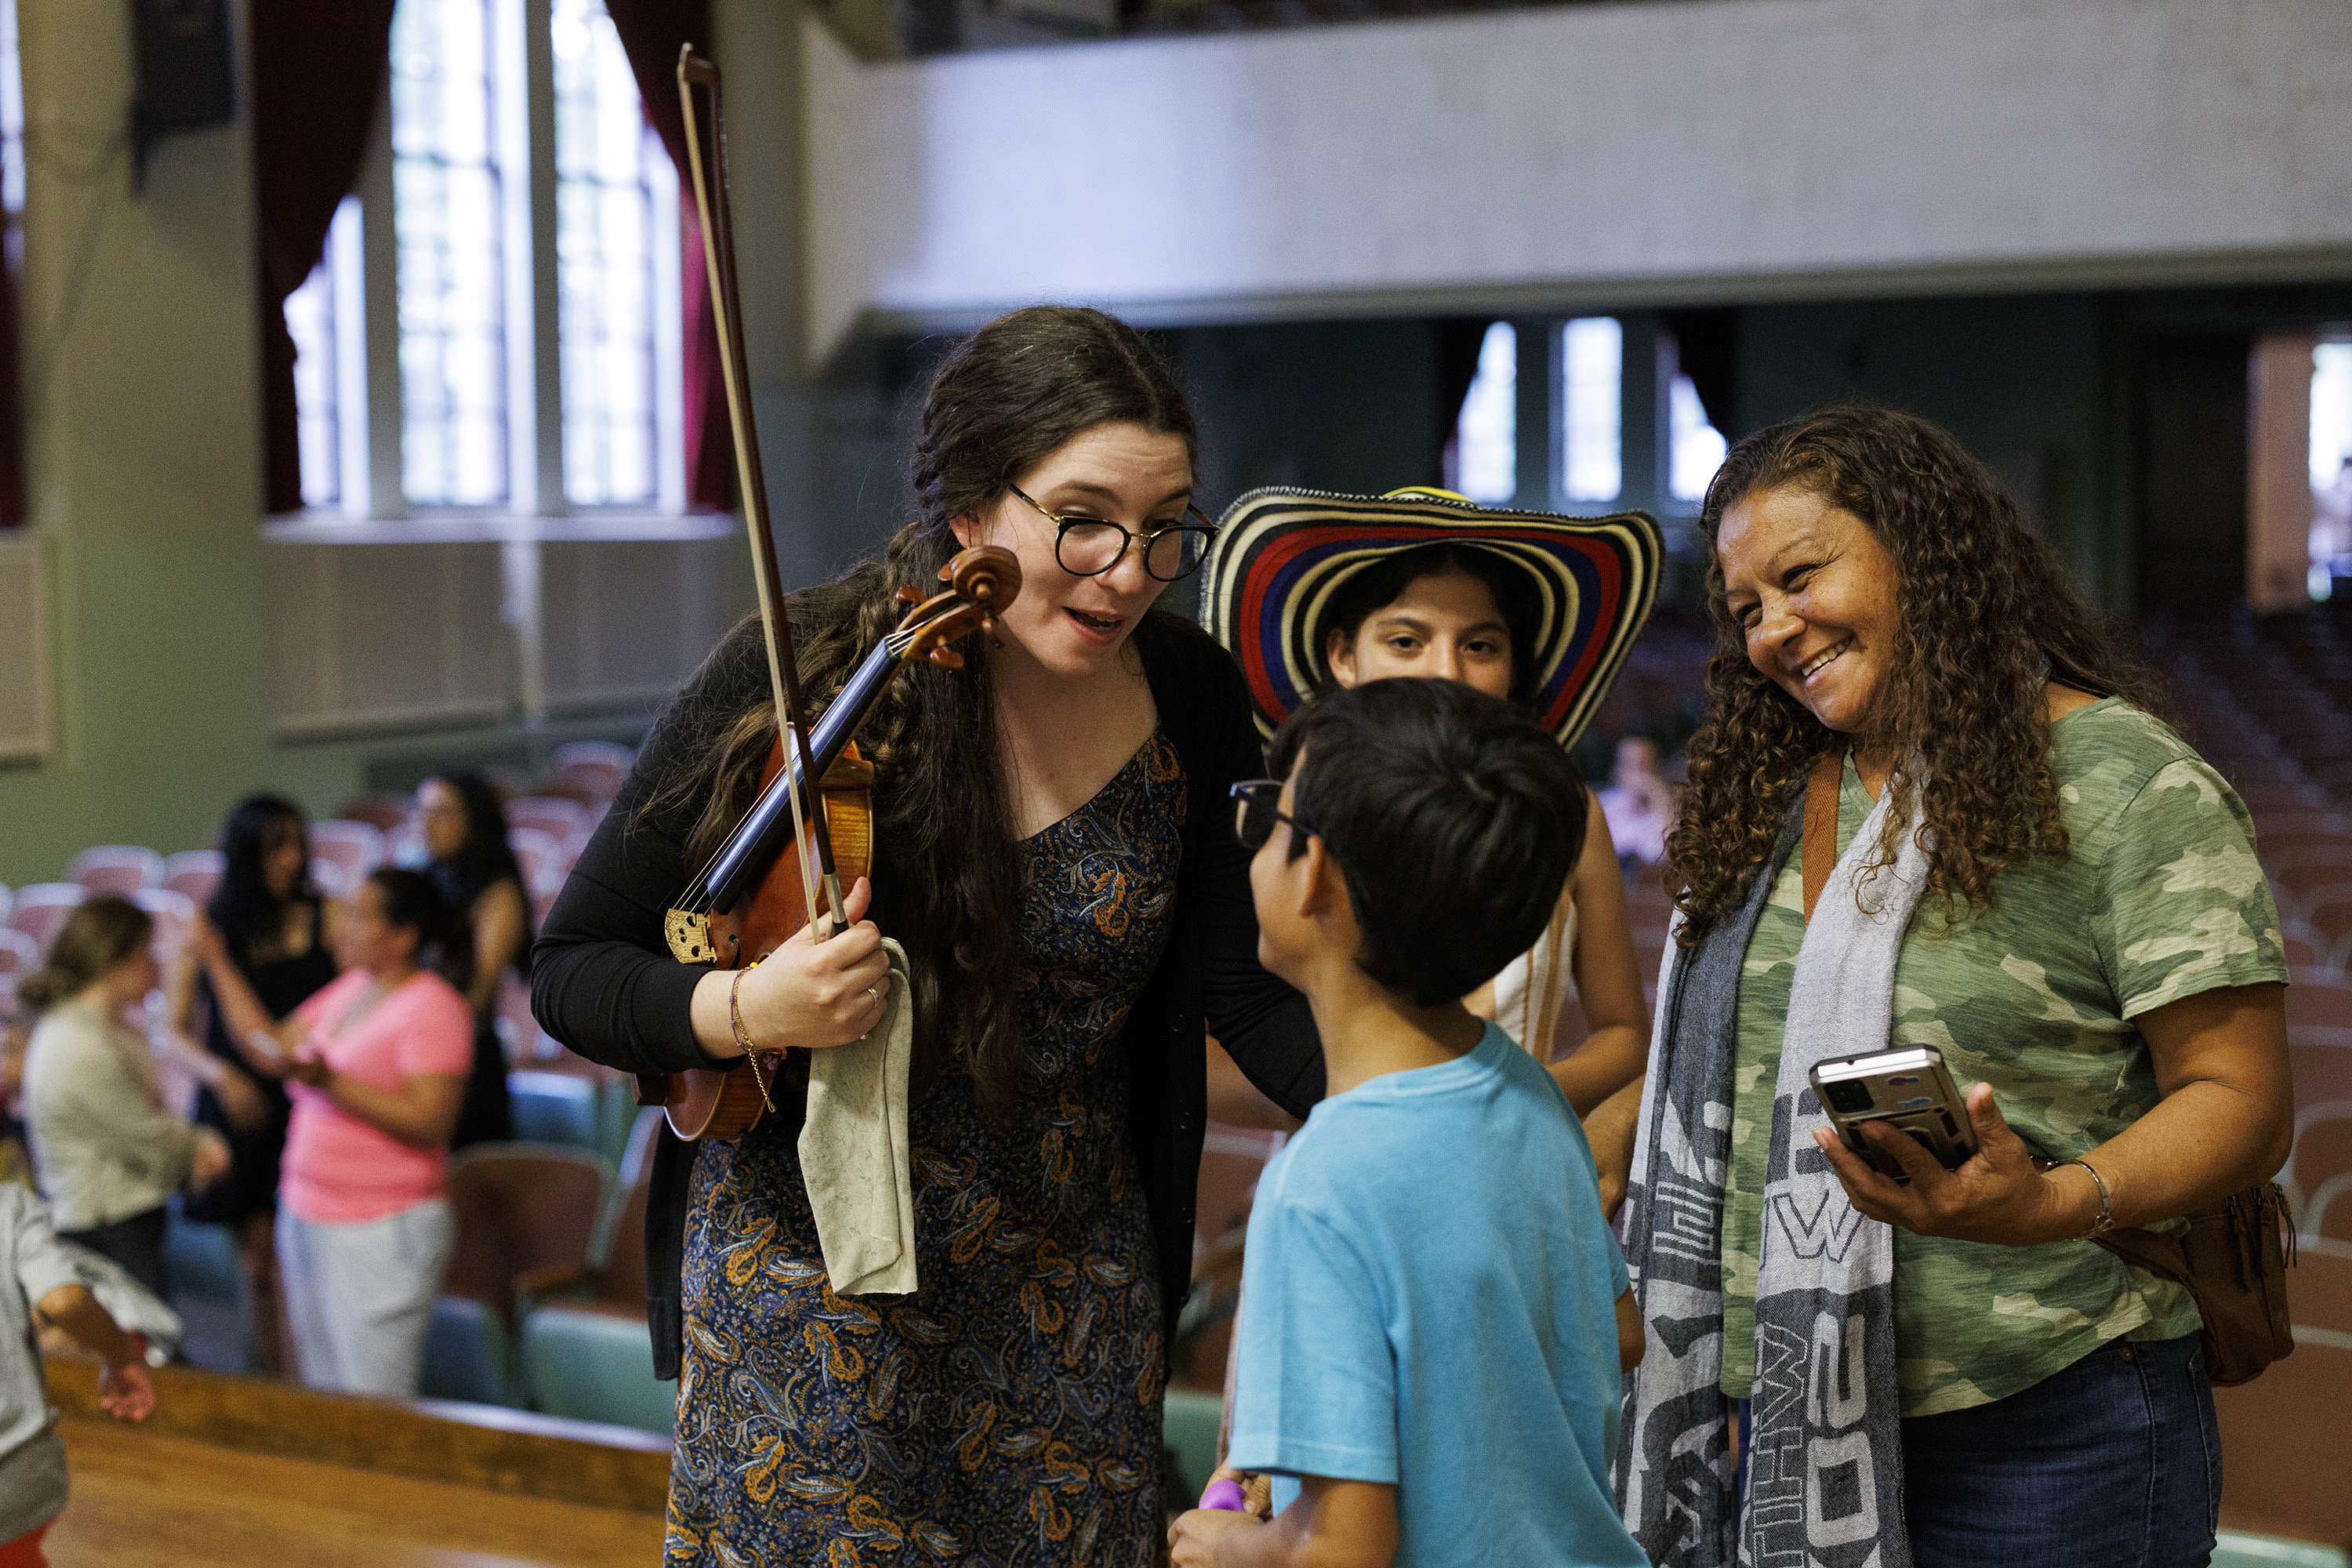 Notes of home: A Civic Orchestra of Chicago Venezuelan fellow brings music to migrants